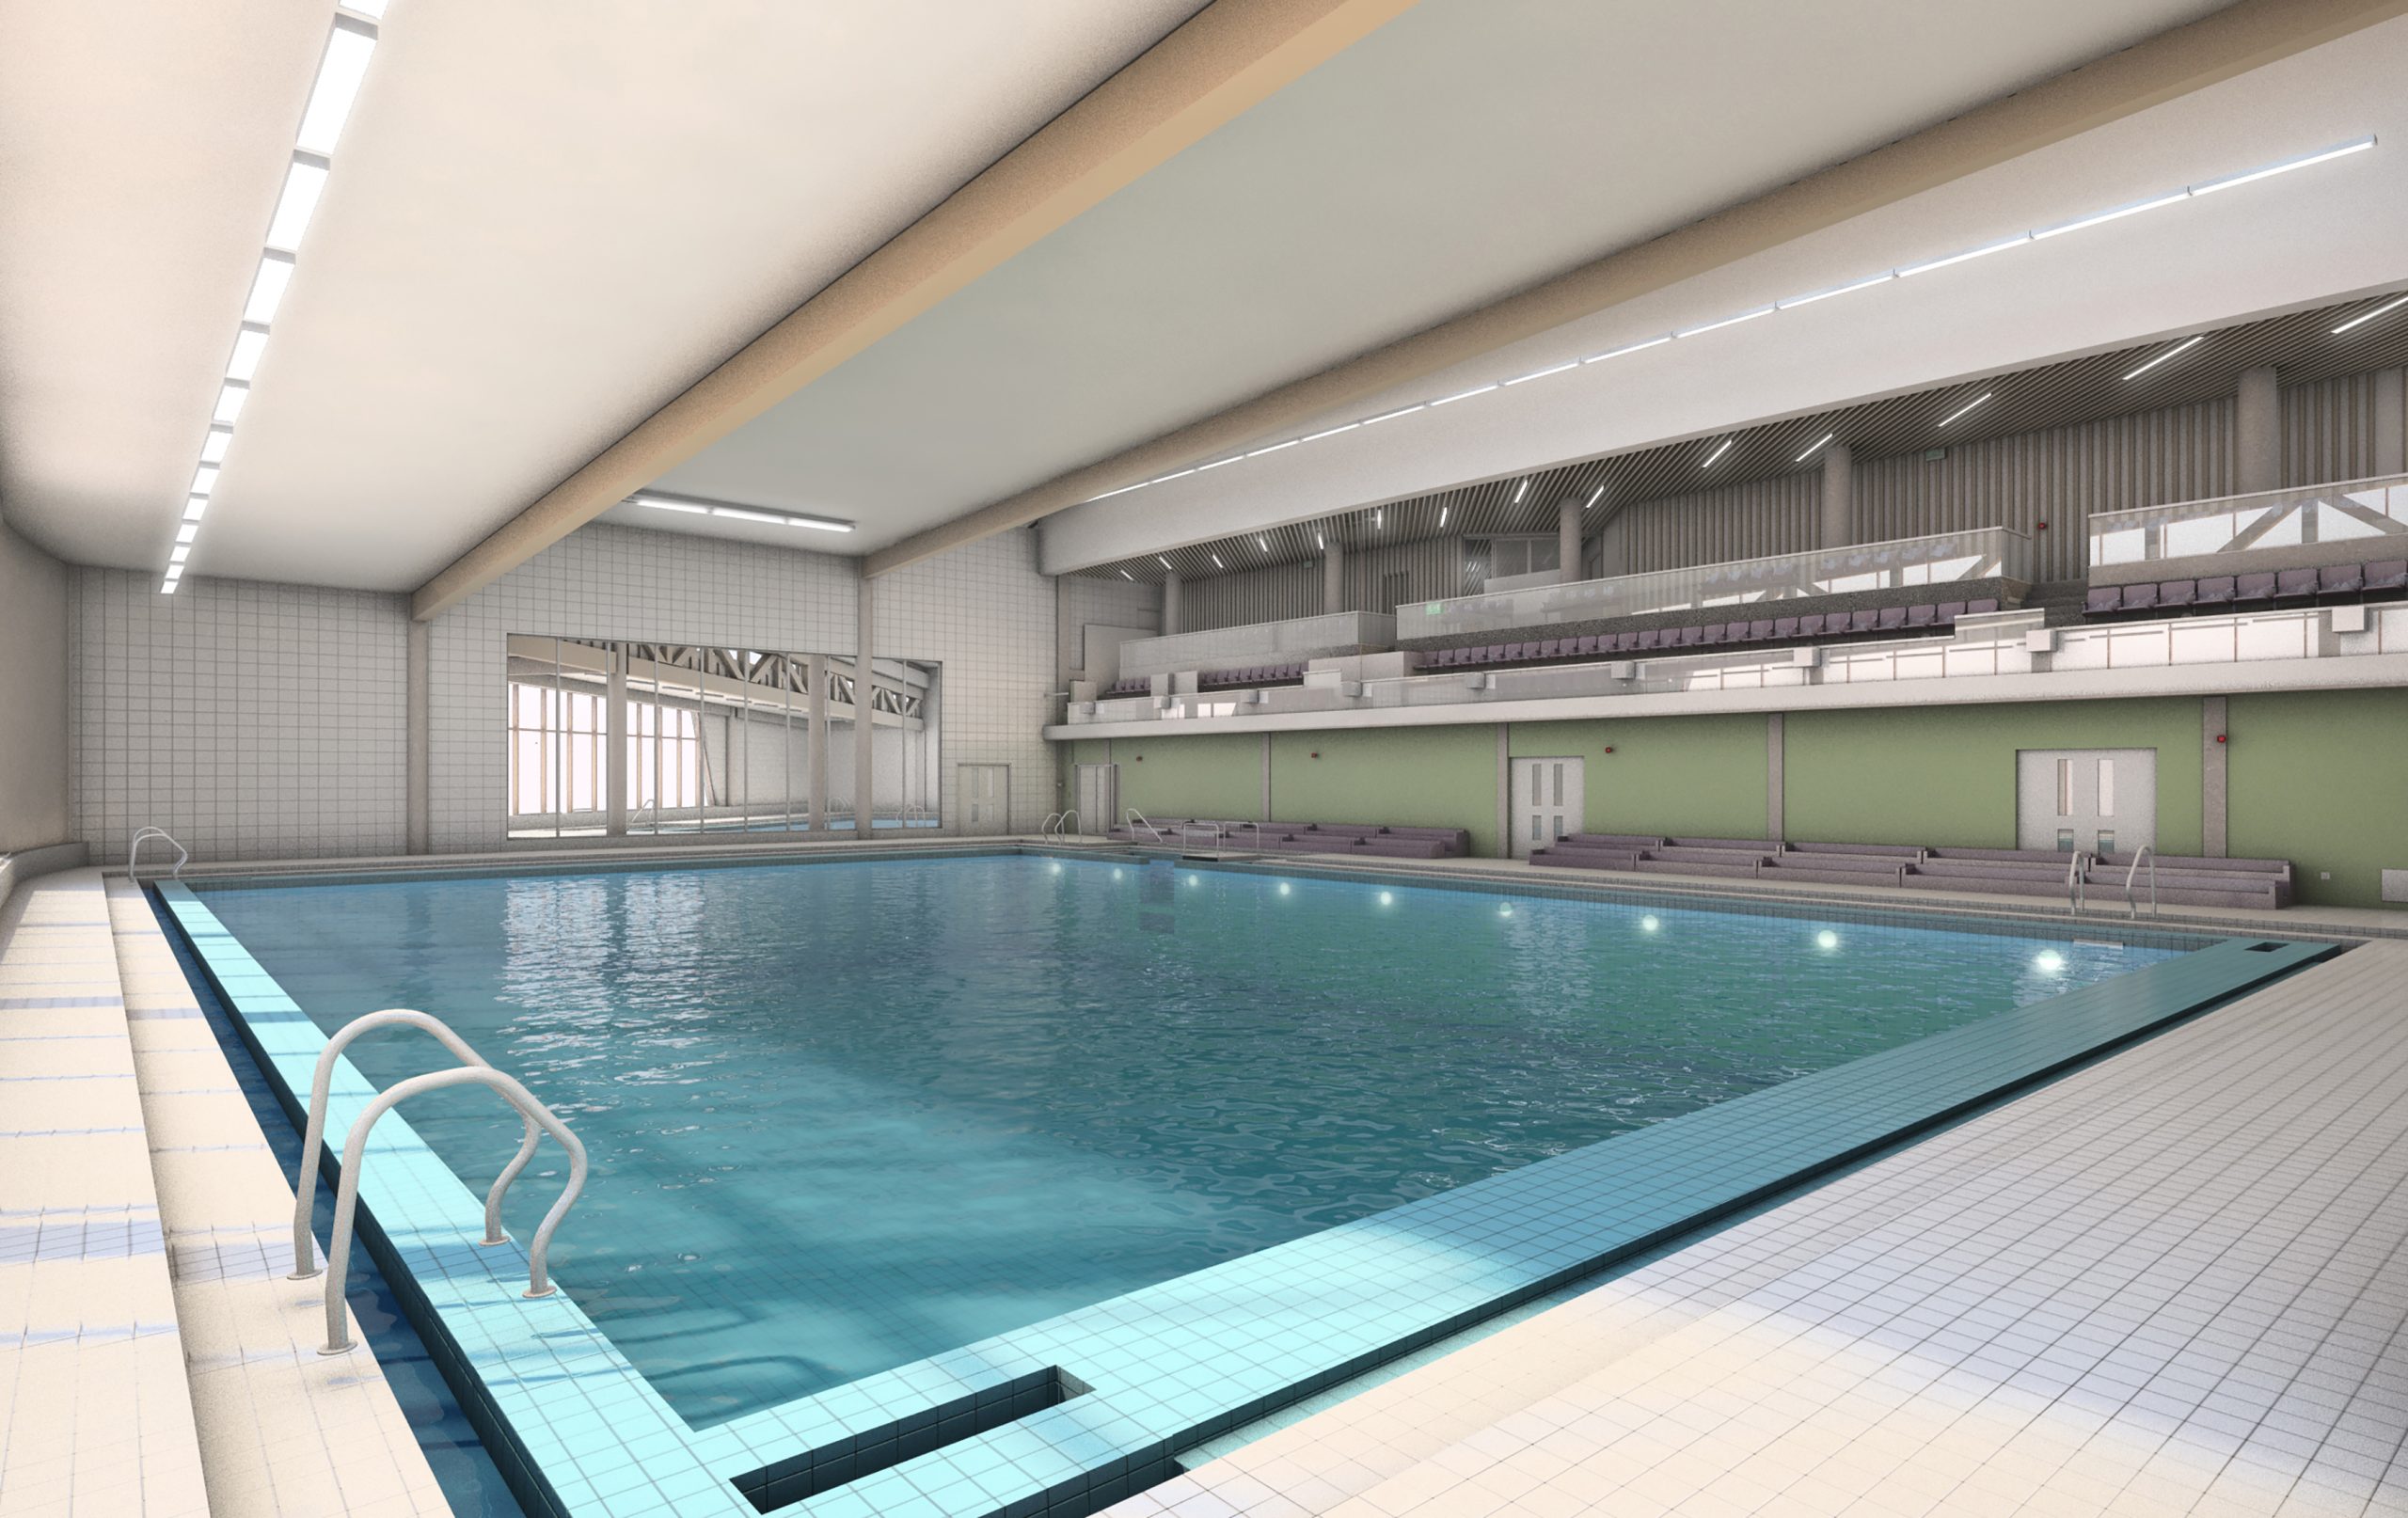 Delivering quality floorcare at the UK’s first energy-efficient Passivhaus leisure centre